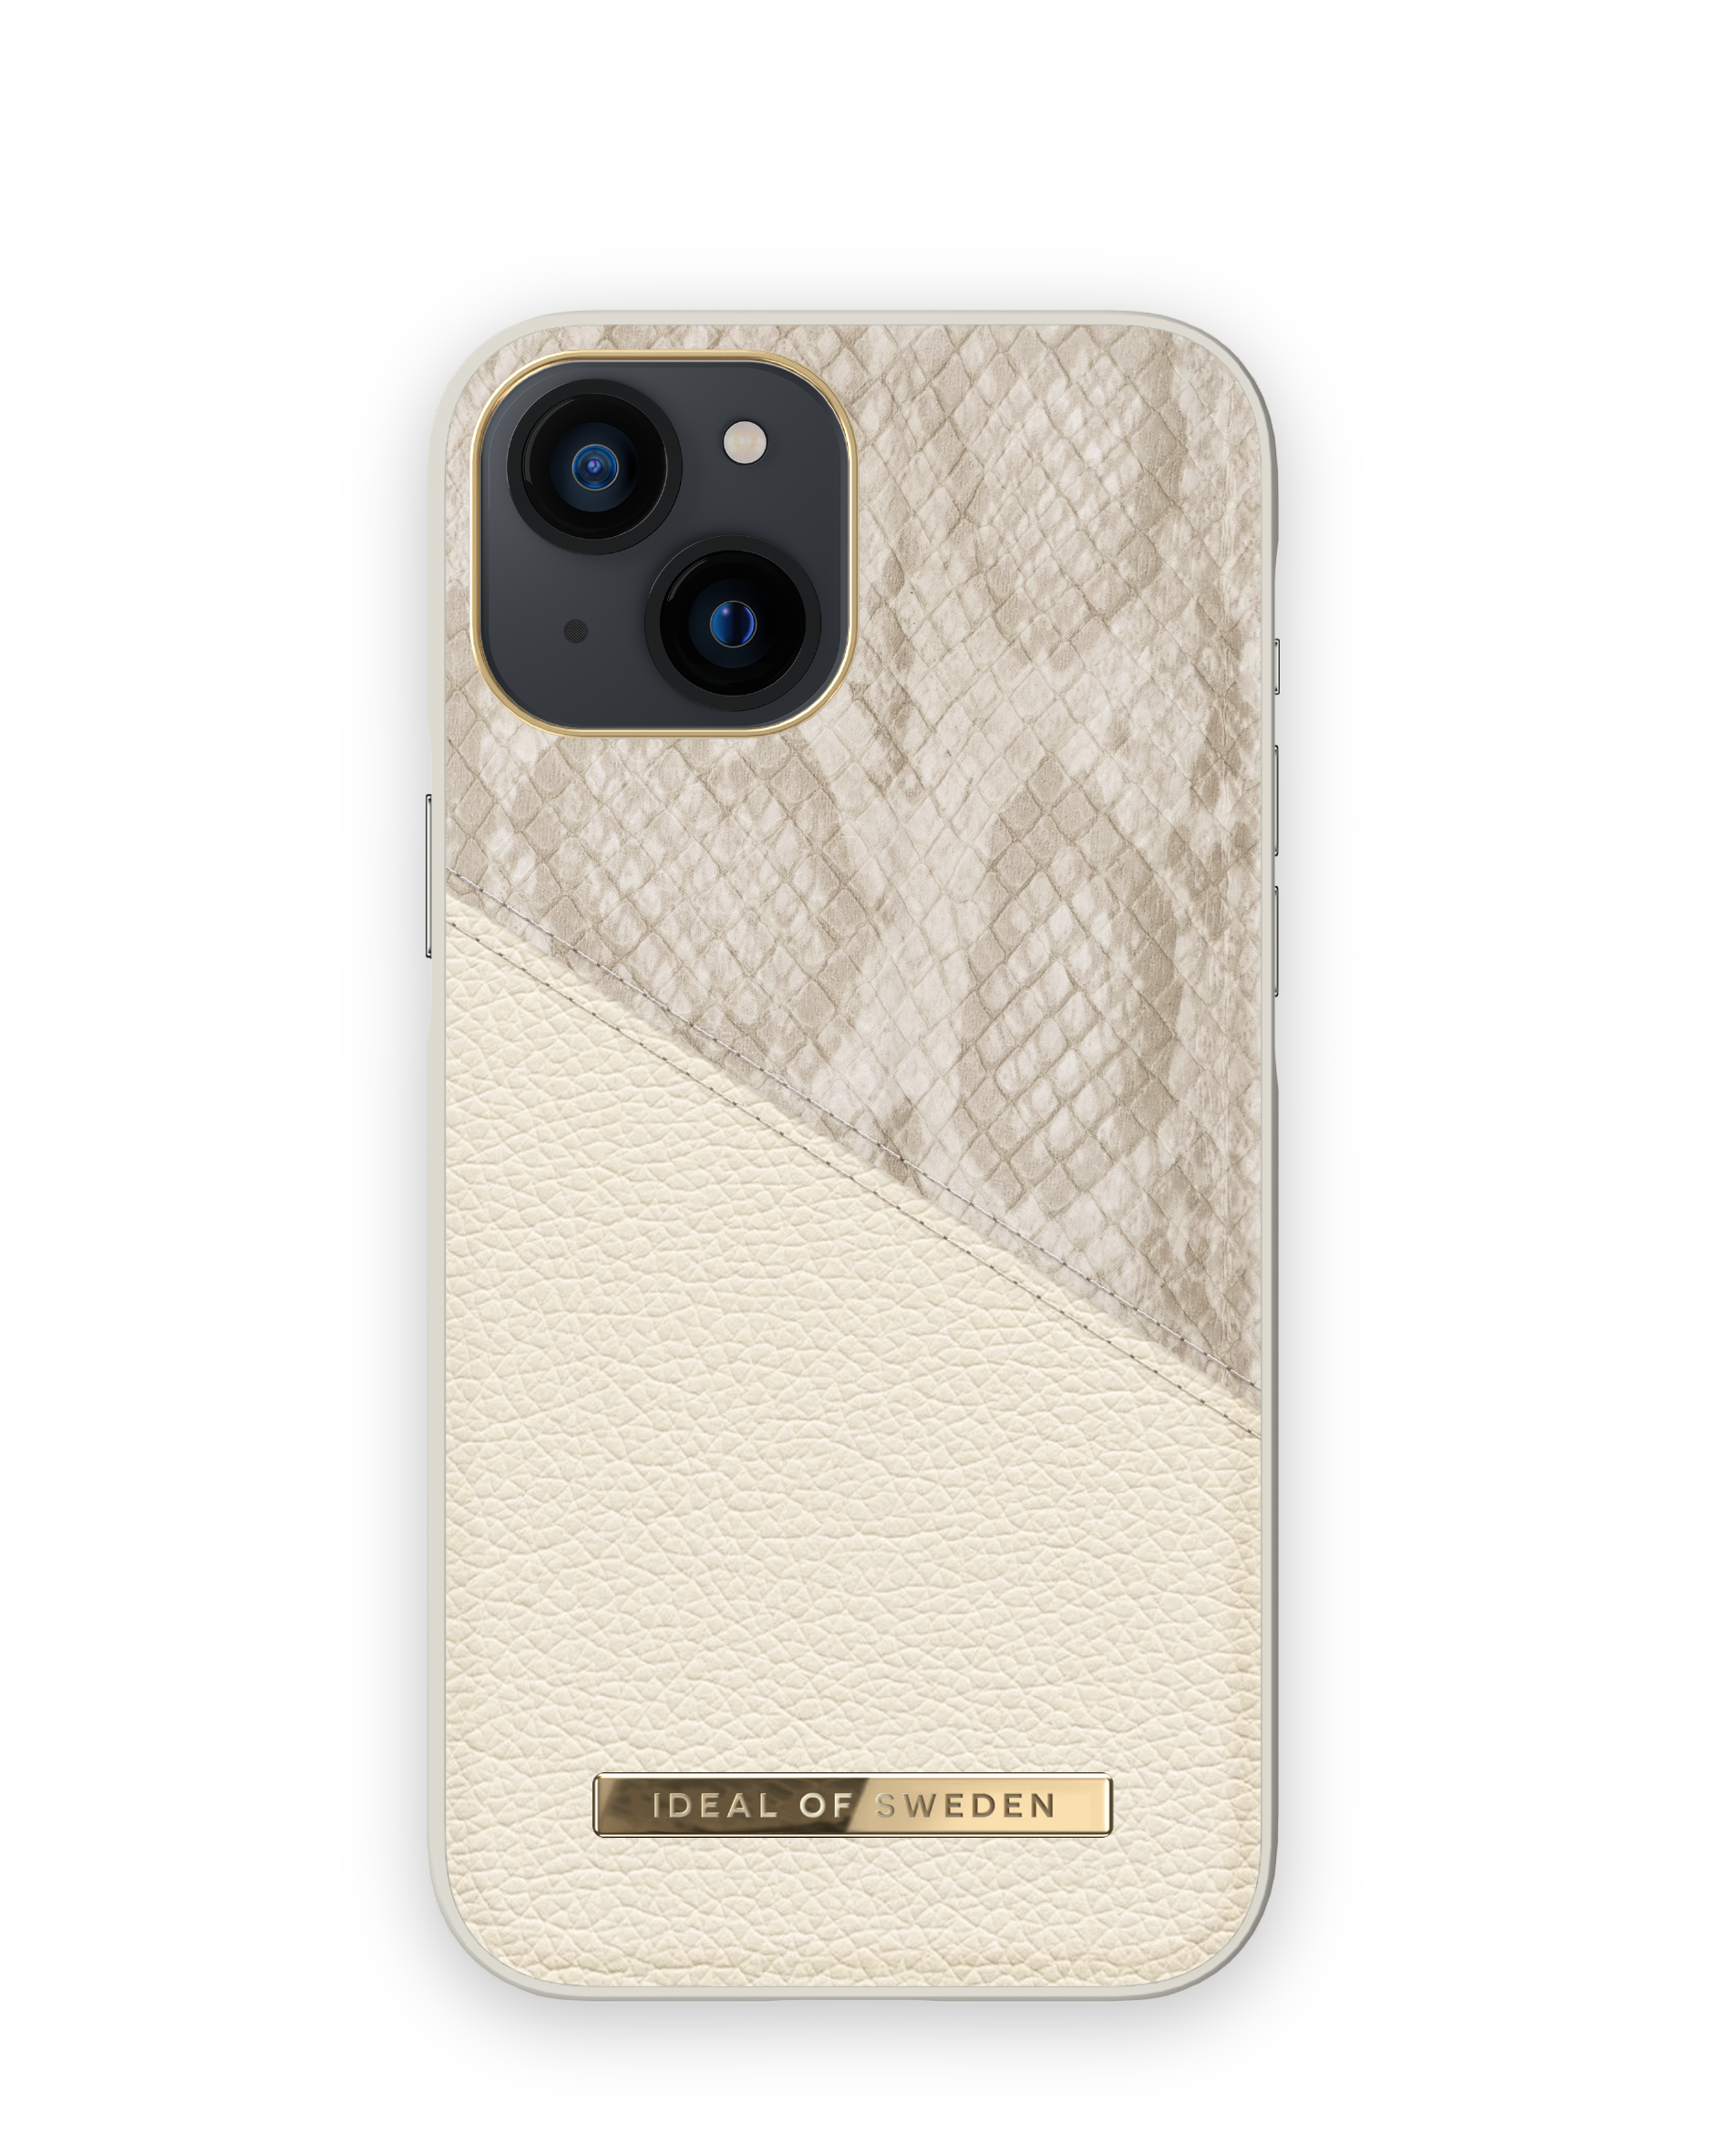 Backcover, Python Pearl Apple, 13 IDEAL OF IDACSS20-I2154-200, Mini, SWEDEN iPhone